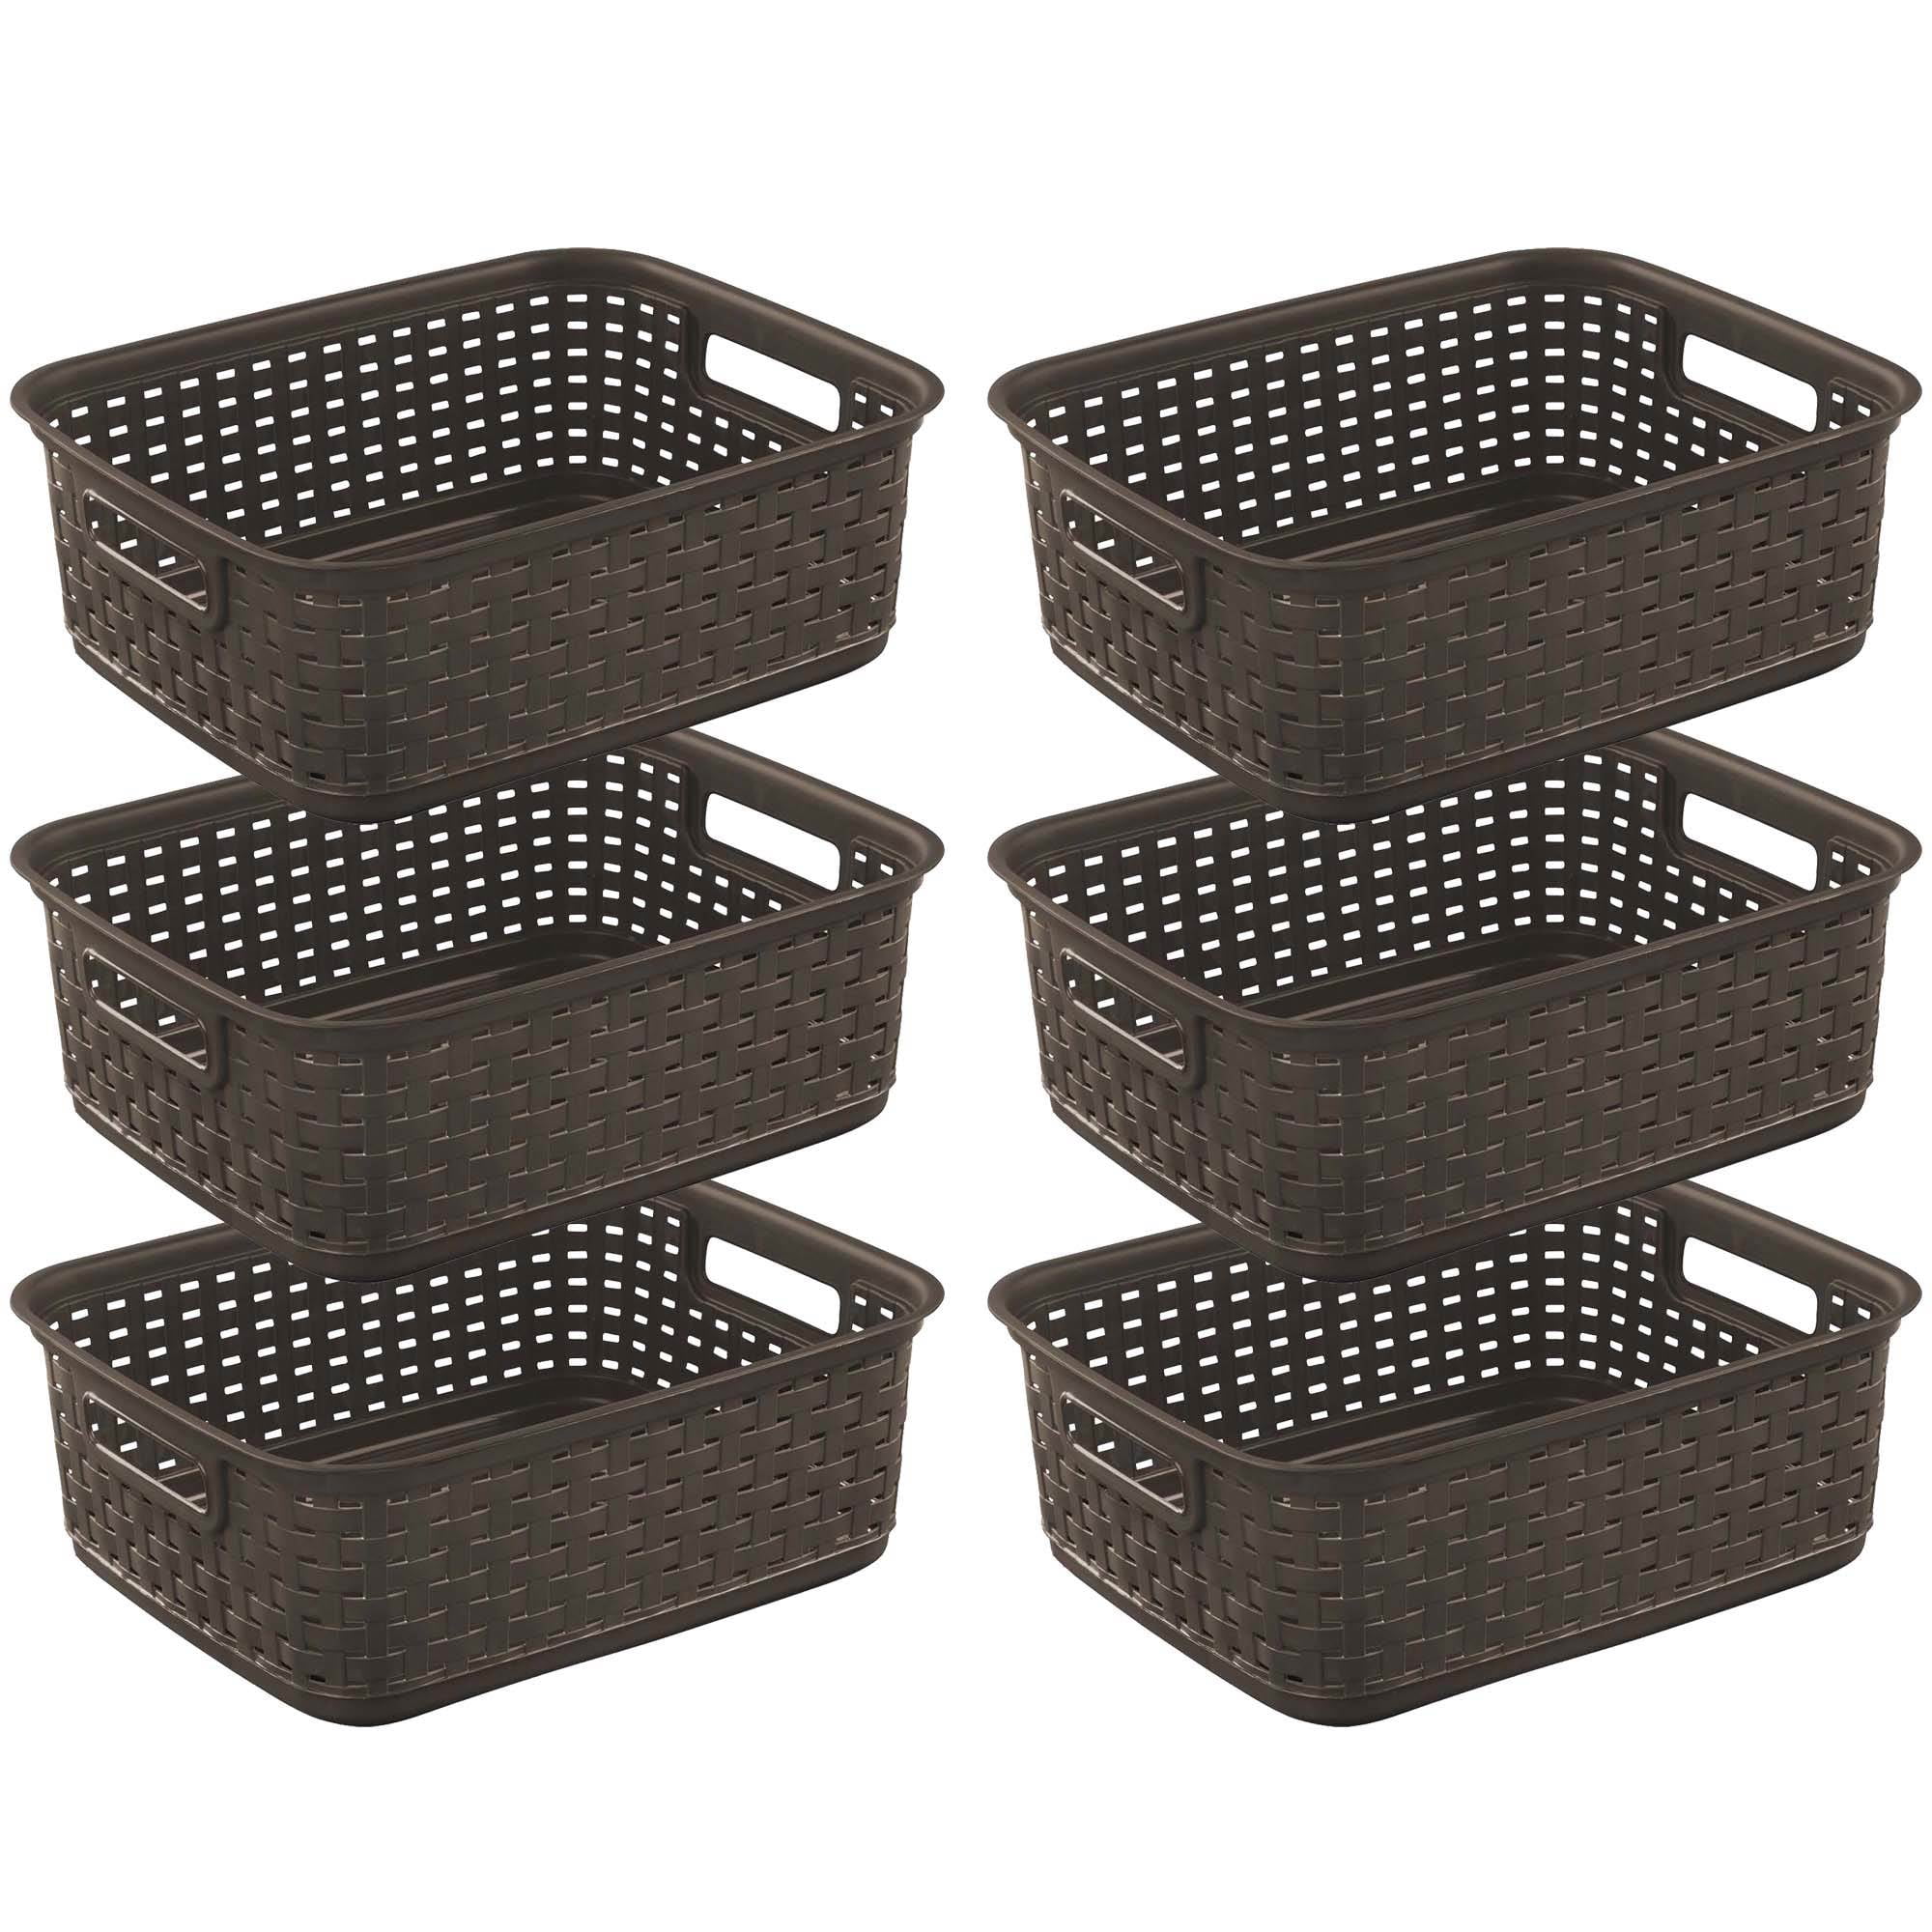 Sterilite Short Weave Wicker Pattern Storage Container Basket, Gray  (6-Pack) 6 x 12726A06 - The Home Depot